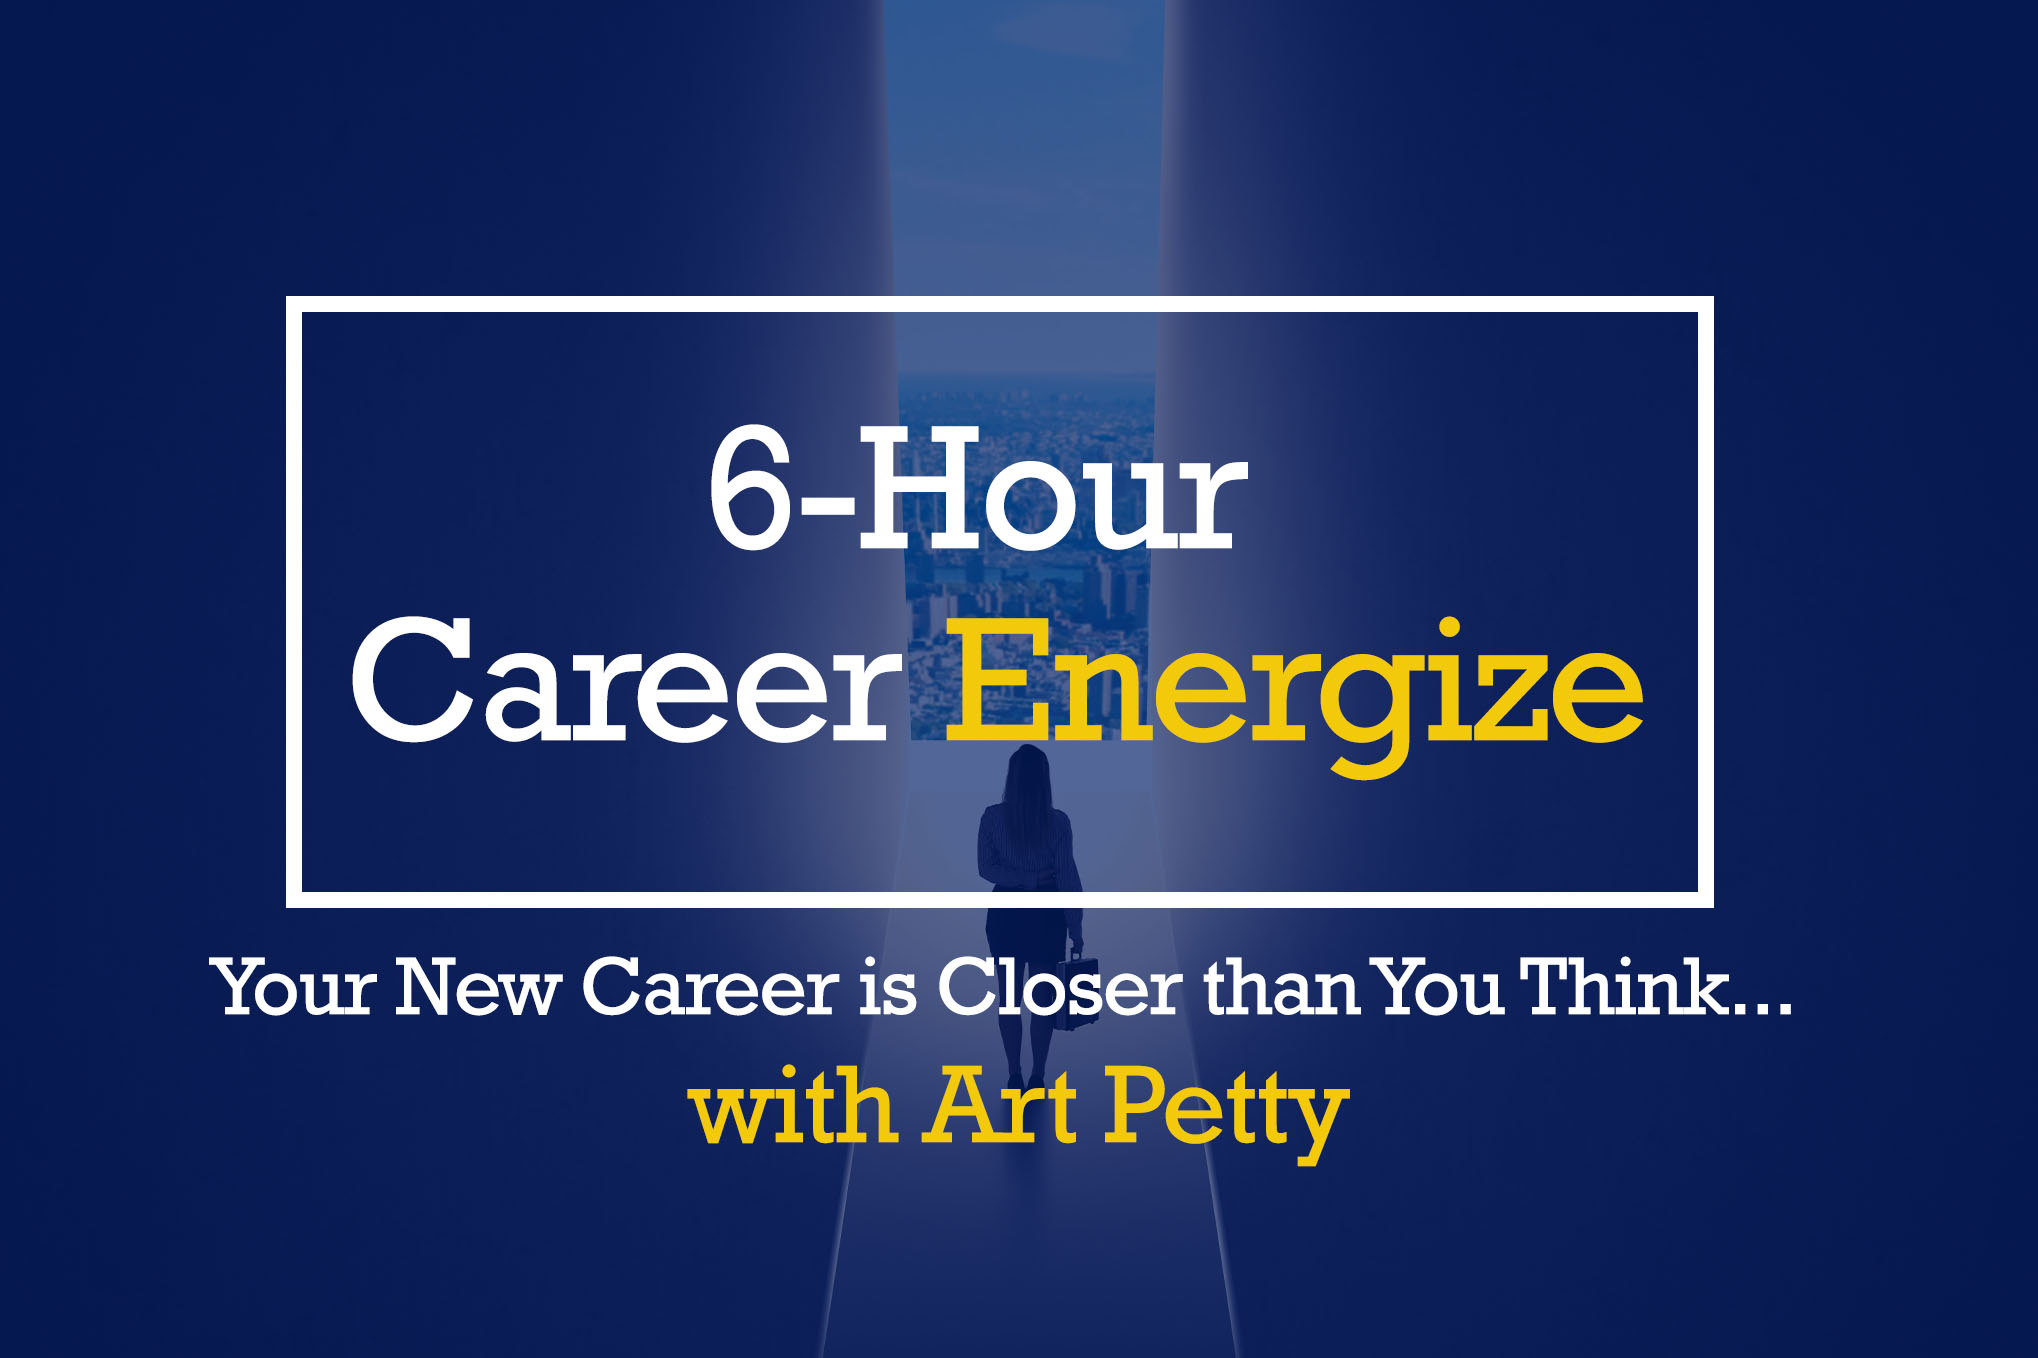 6-hour career energize